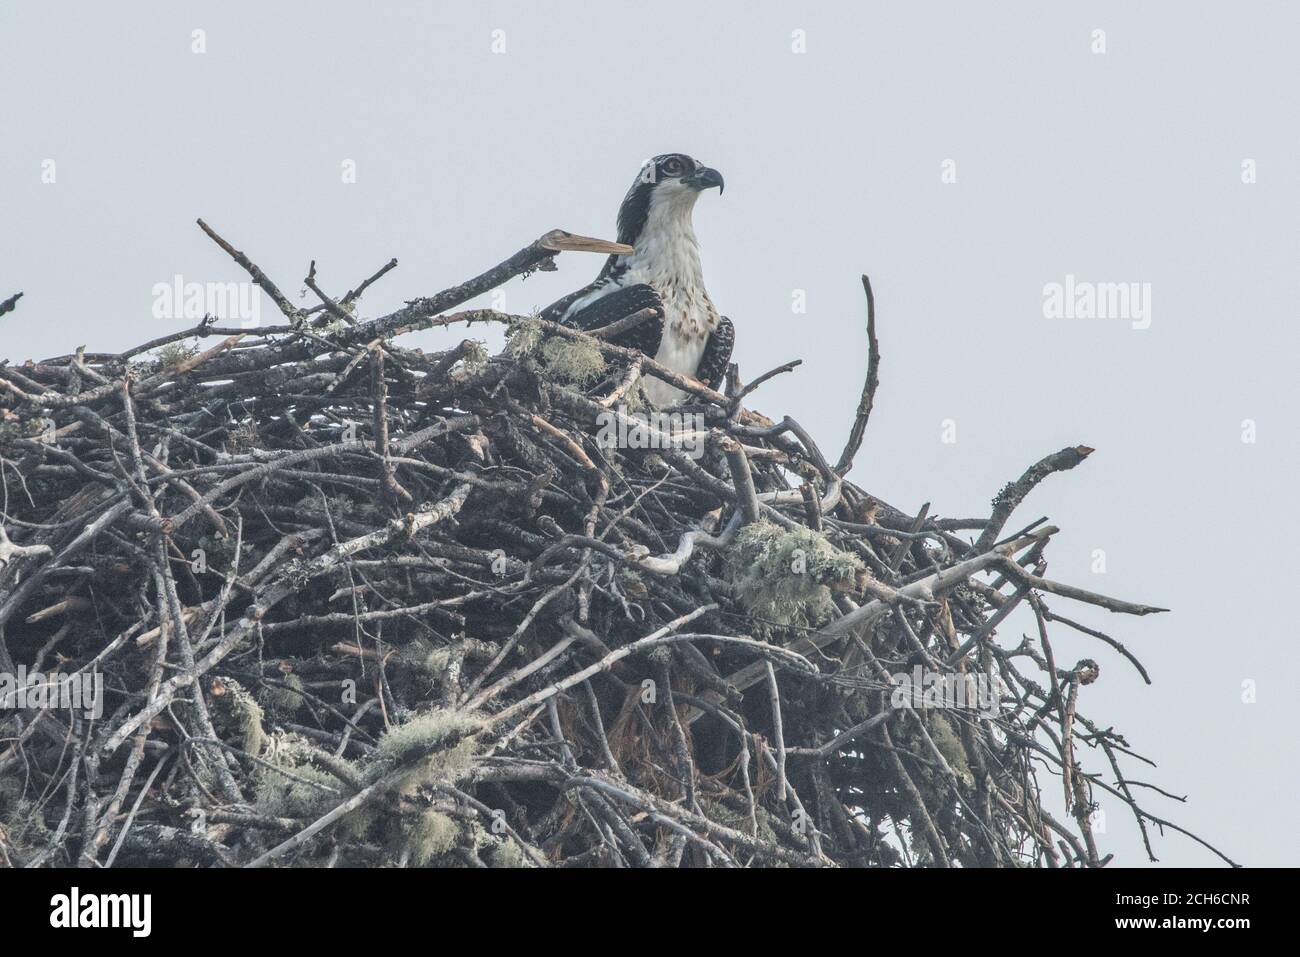 A wild osprey (Pandion haliaetus) sits in its massive nest by a lake in Mendocino County, California. Stock Photo